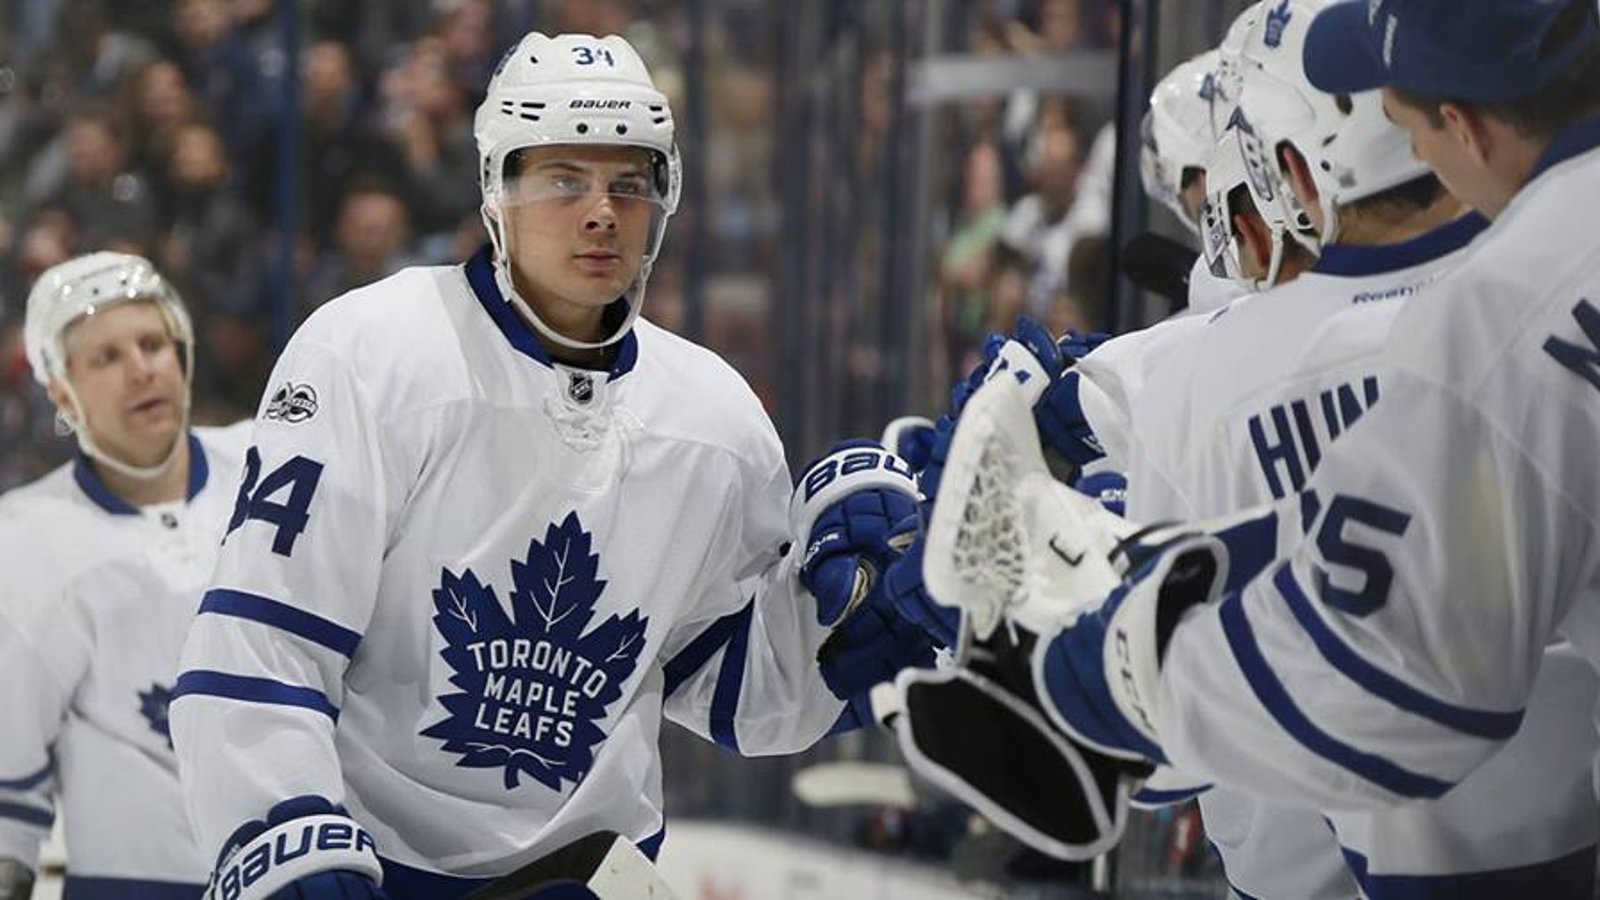 Breaking: Leafs approach 100-year franchise record